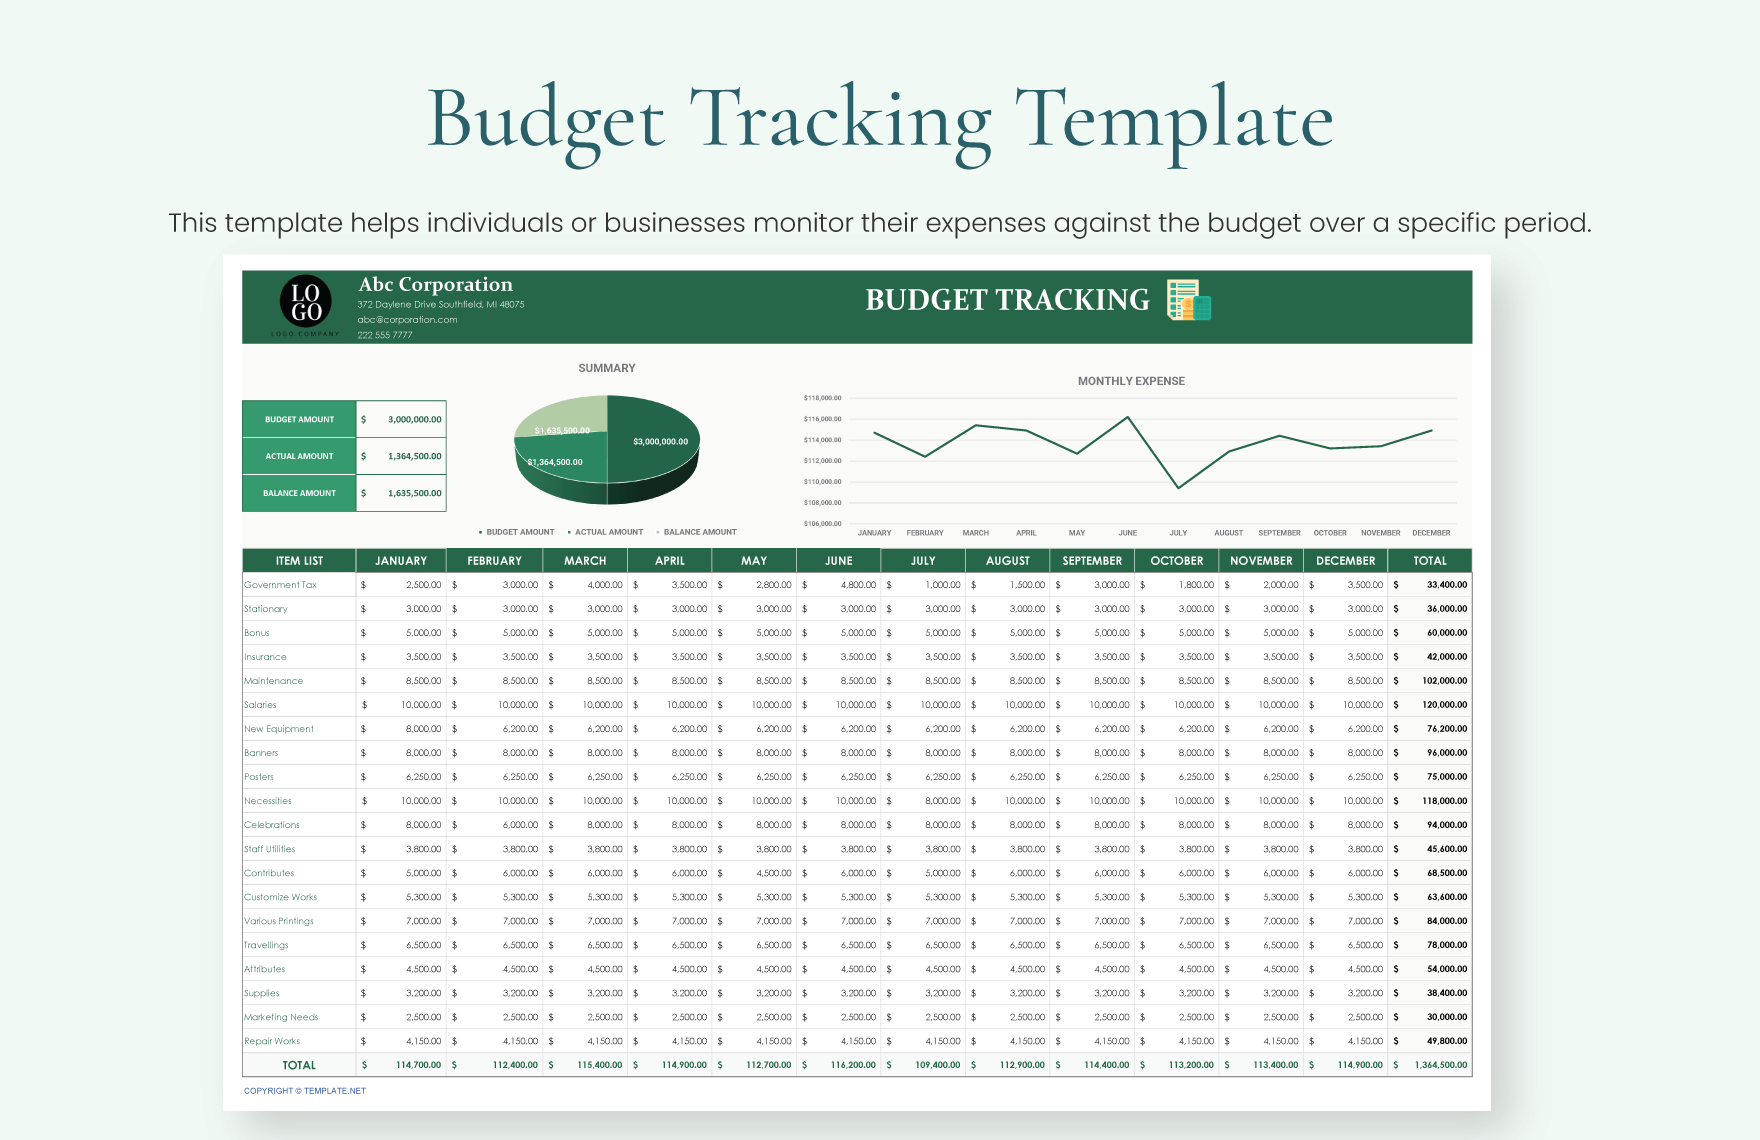 Budget Tracking Template